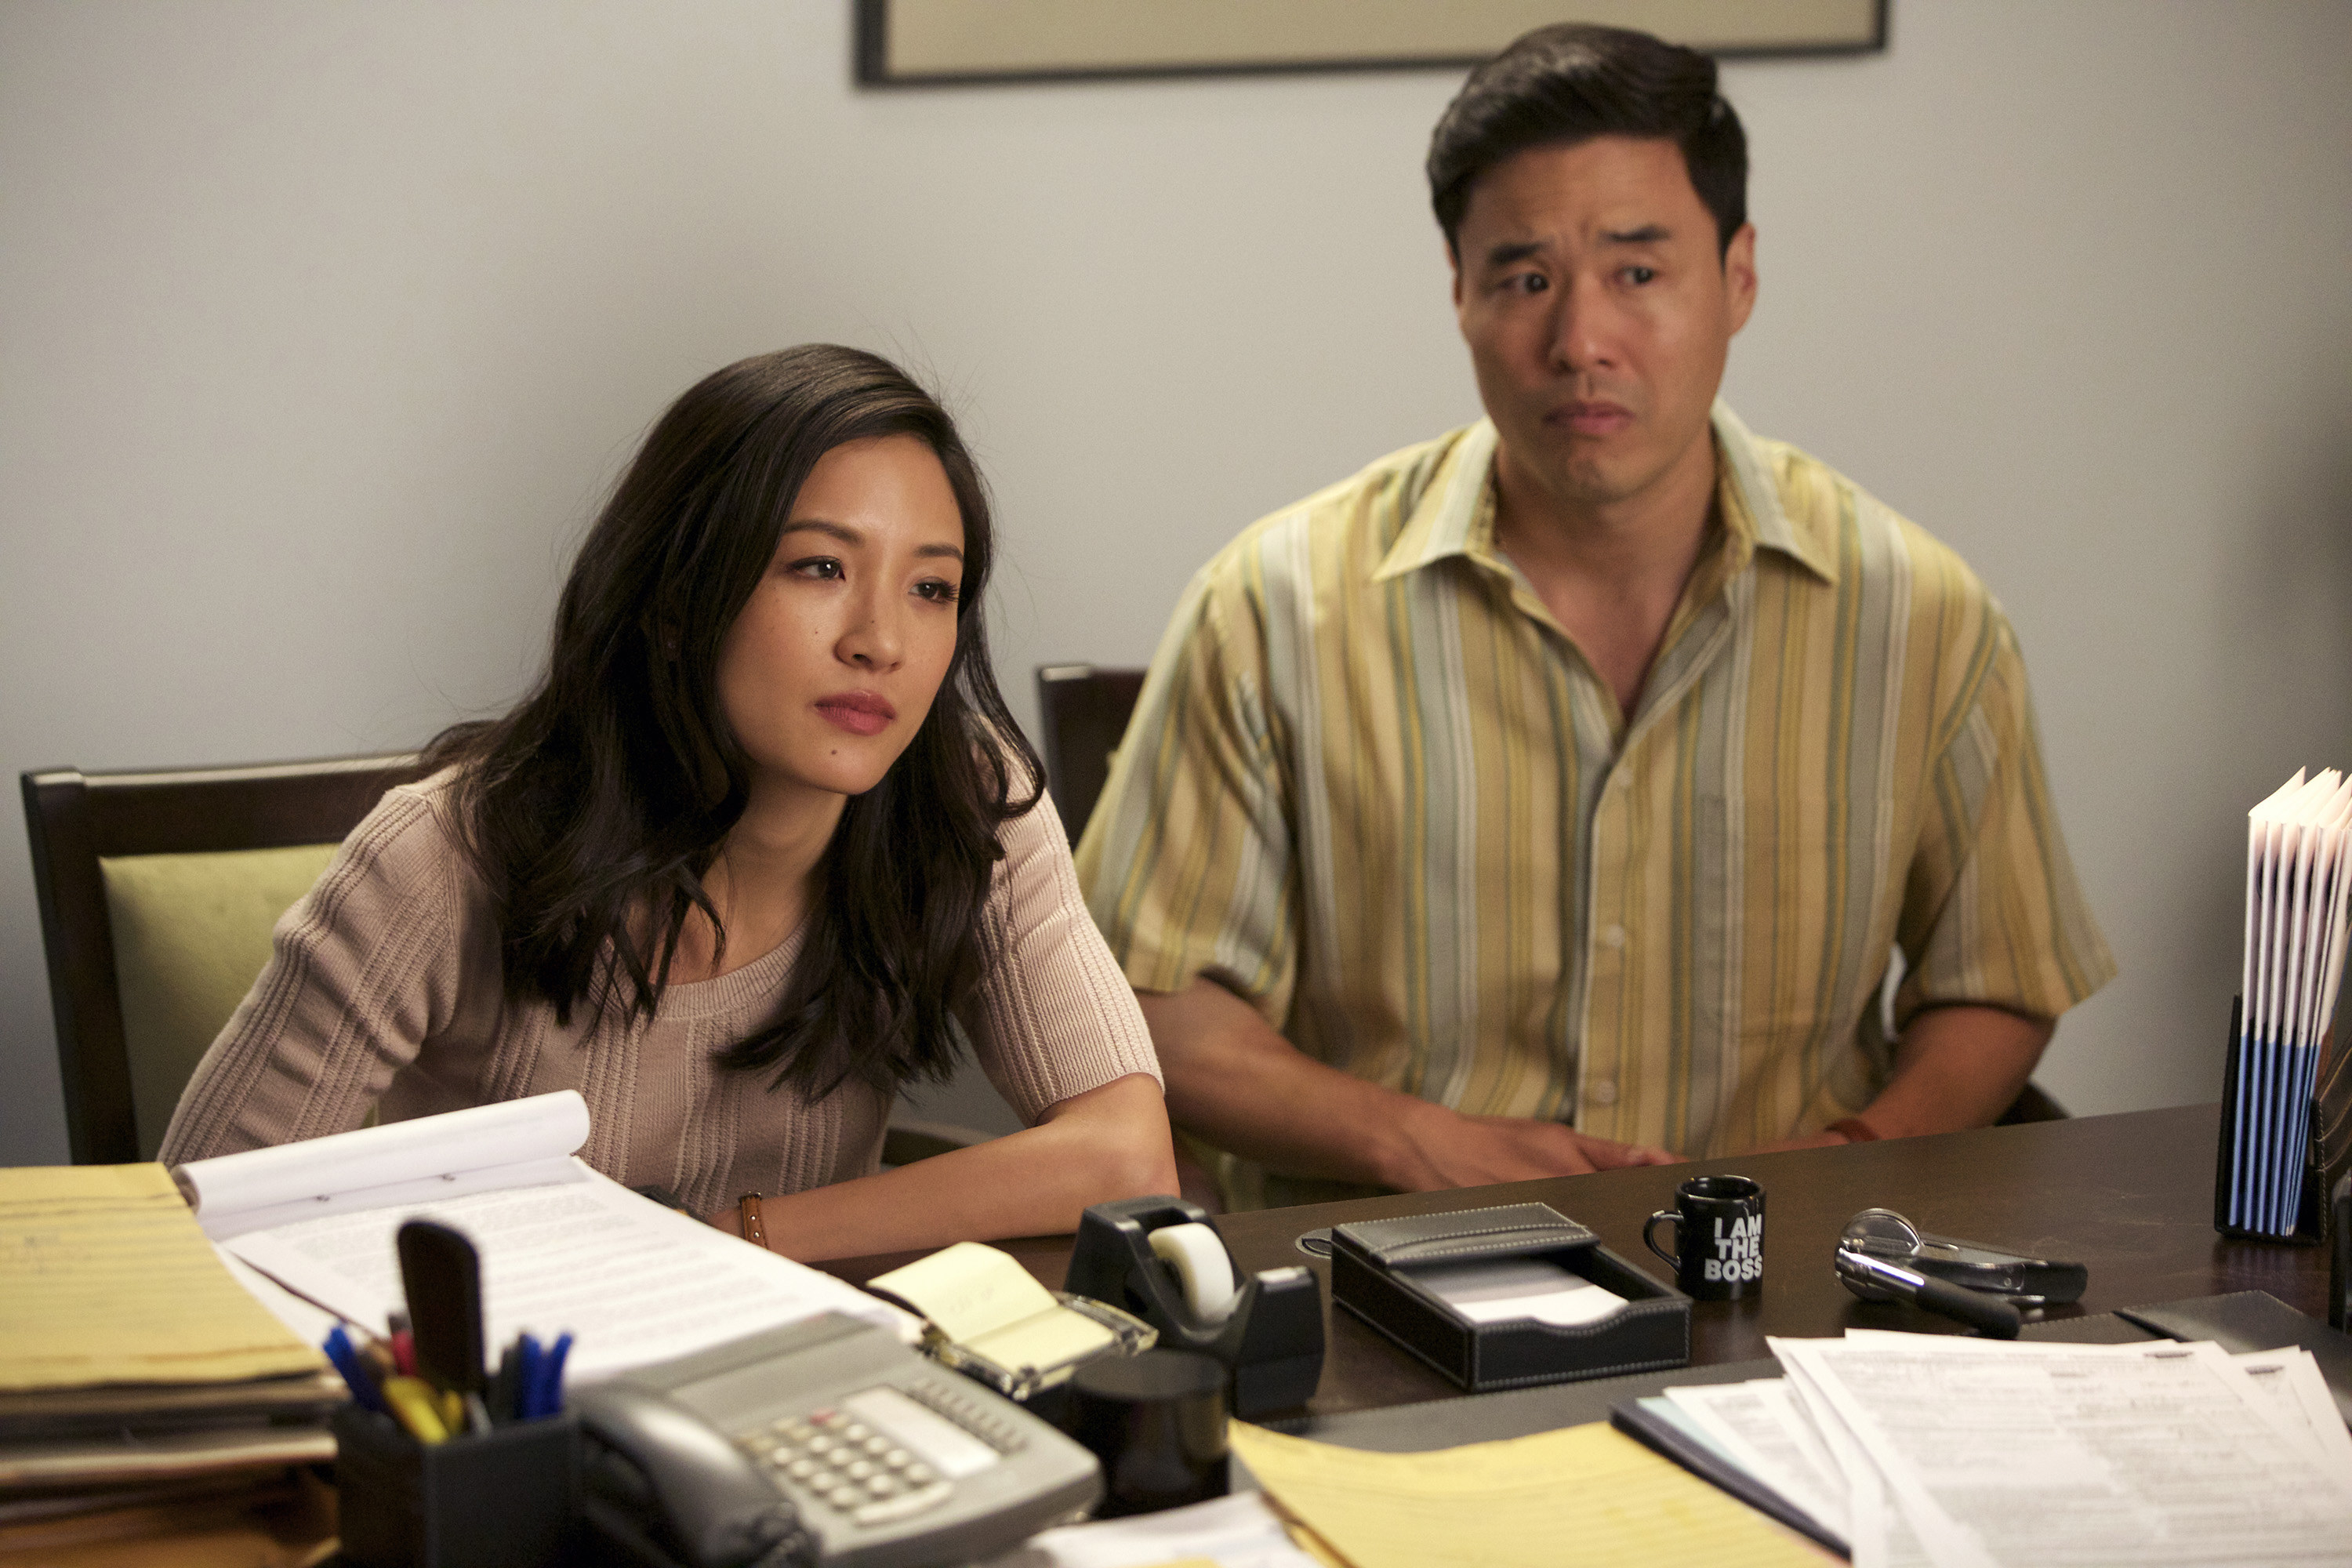 Constance Wu and Randall Park as the parents in the series in an office